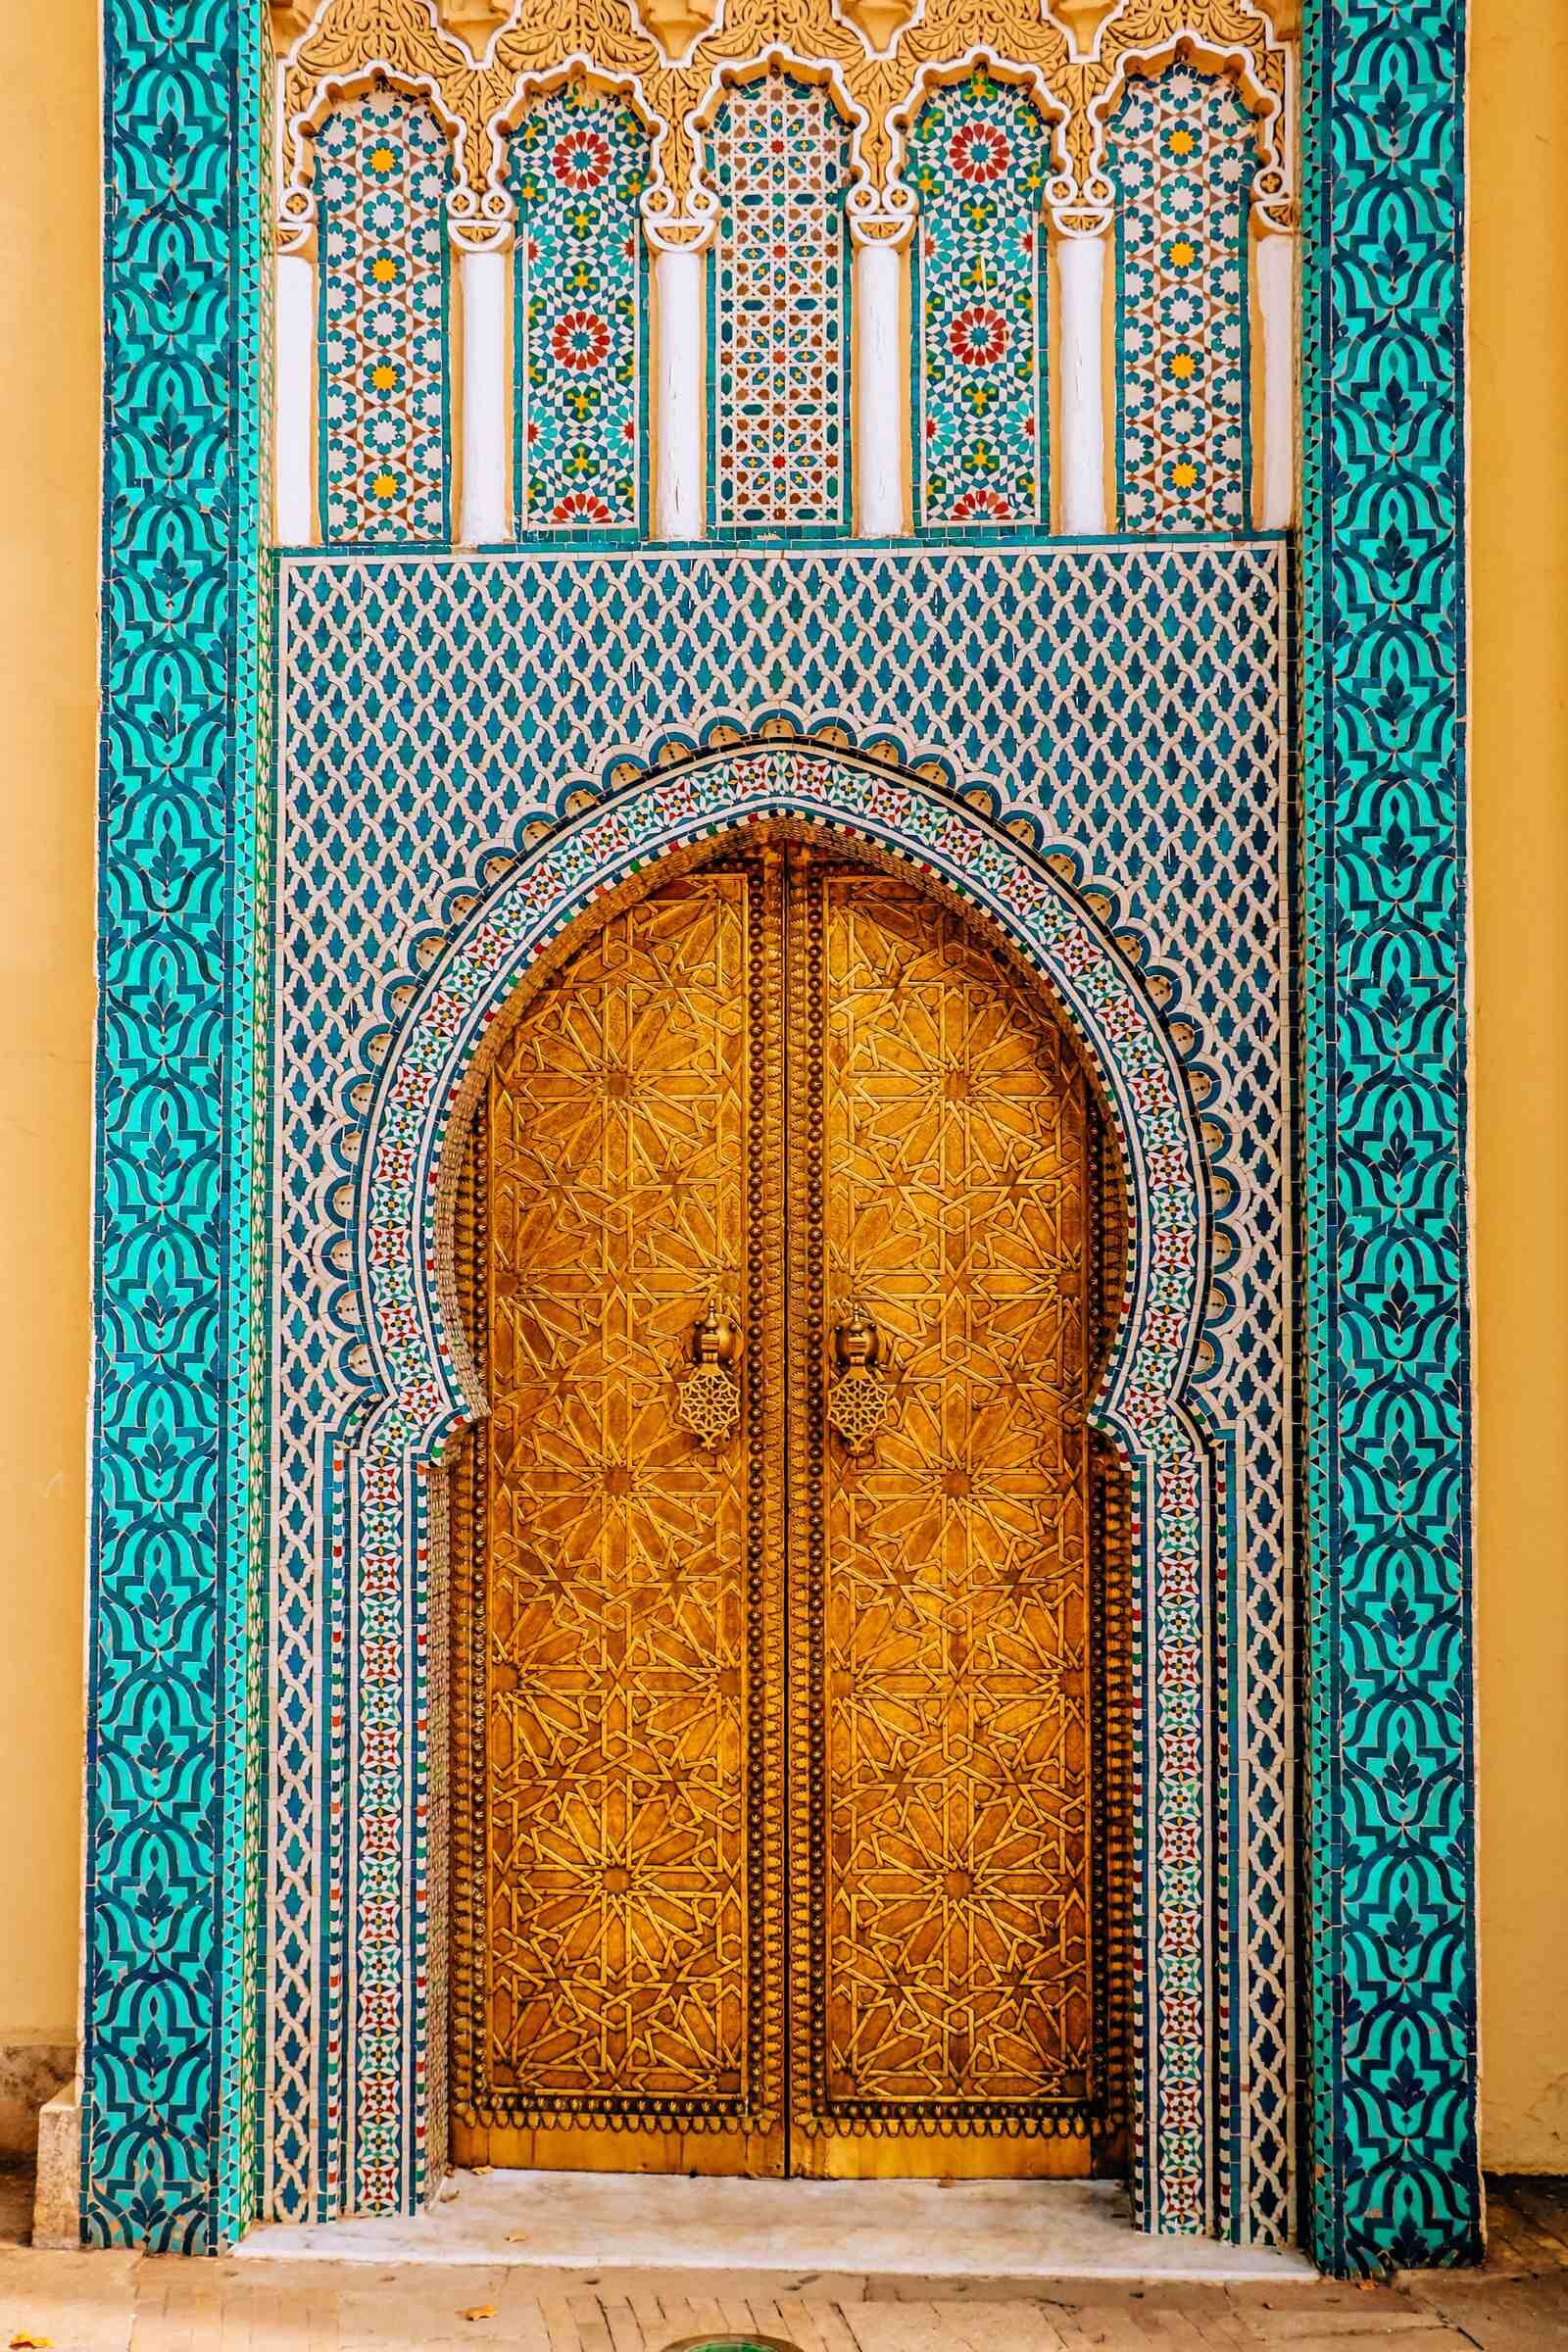 Very colourful and ornate Fez palace doors